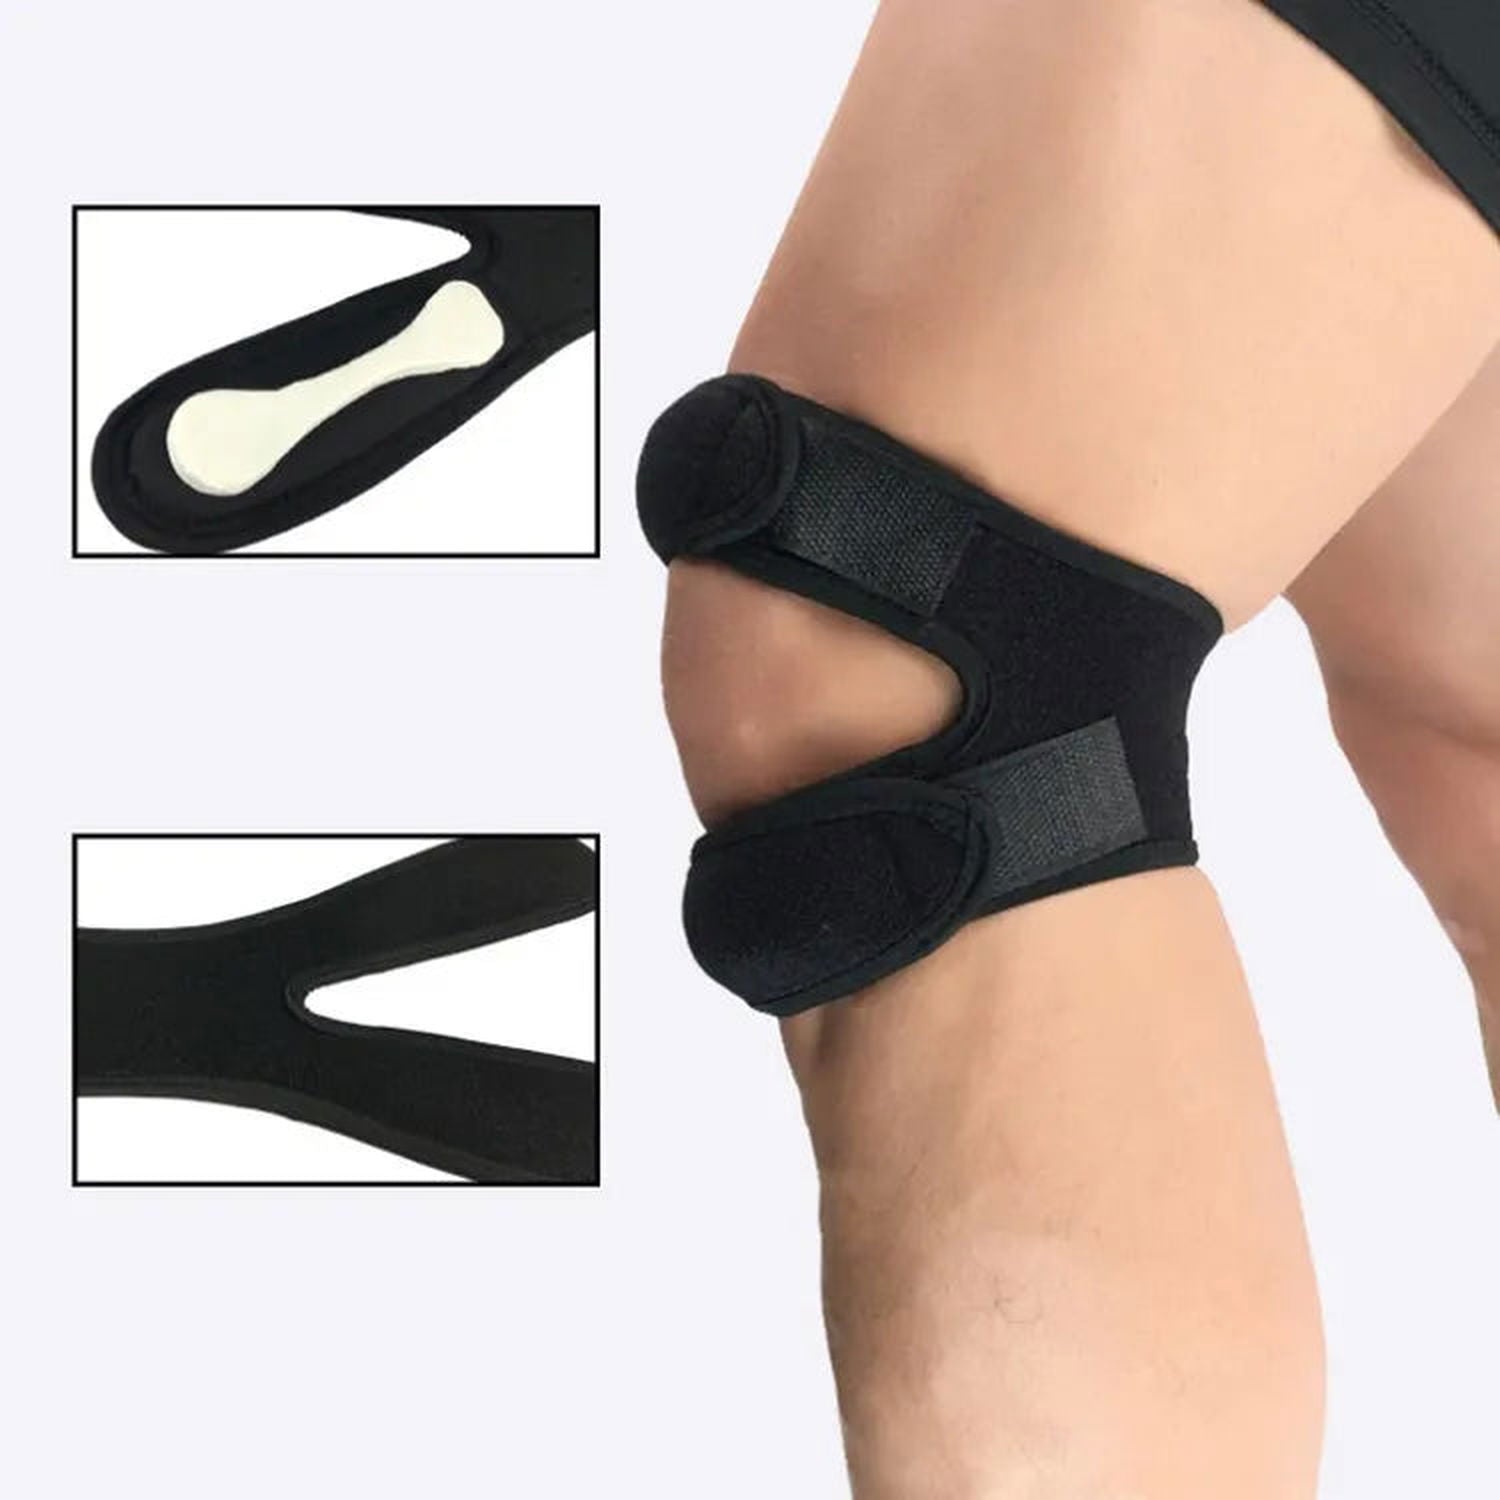 Brace Pad Protector Open Knee Wrap Band Fitness - ARCHE